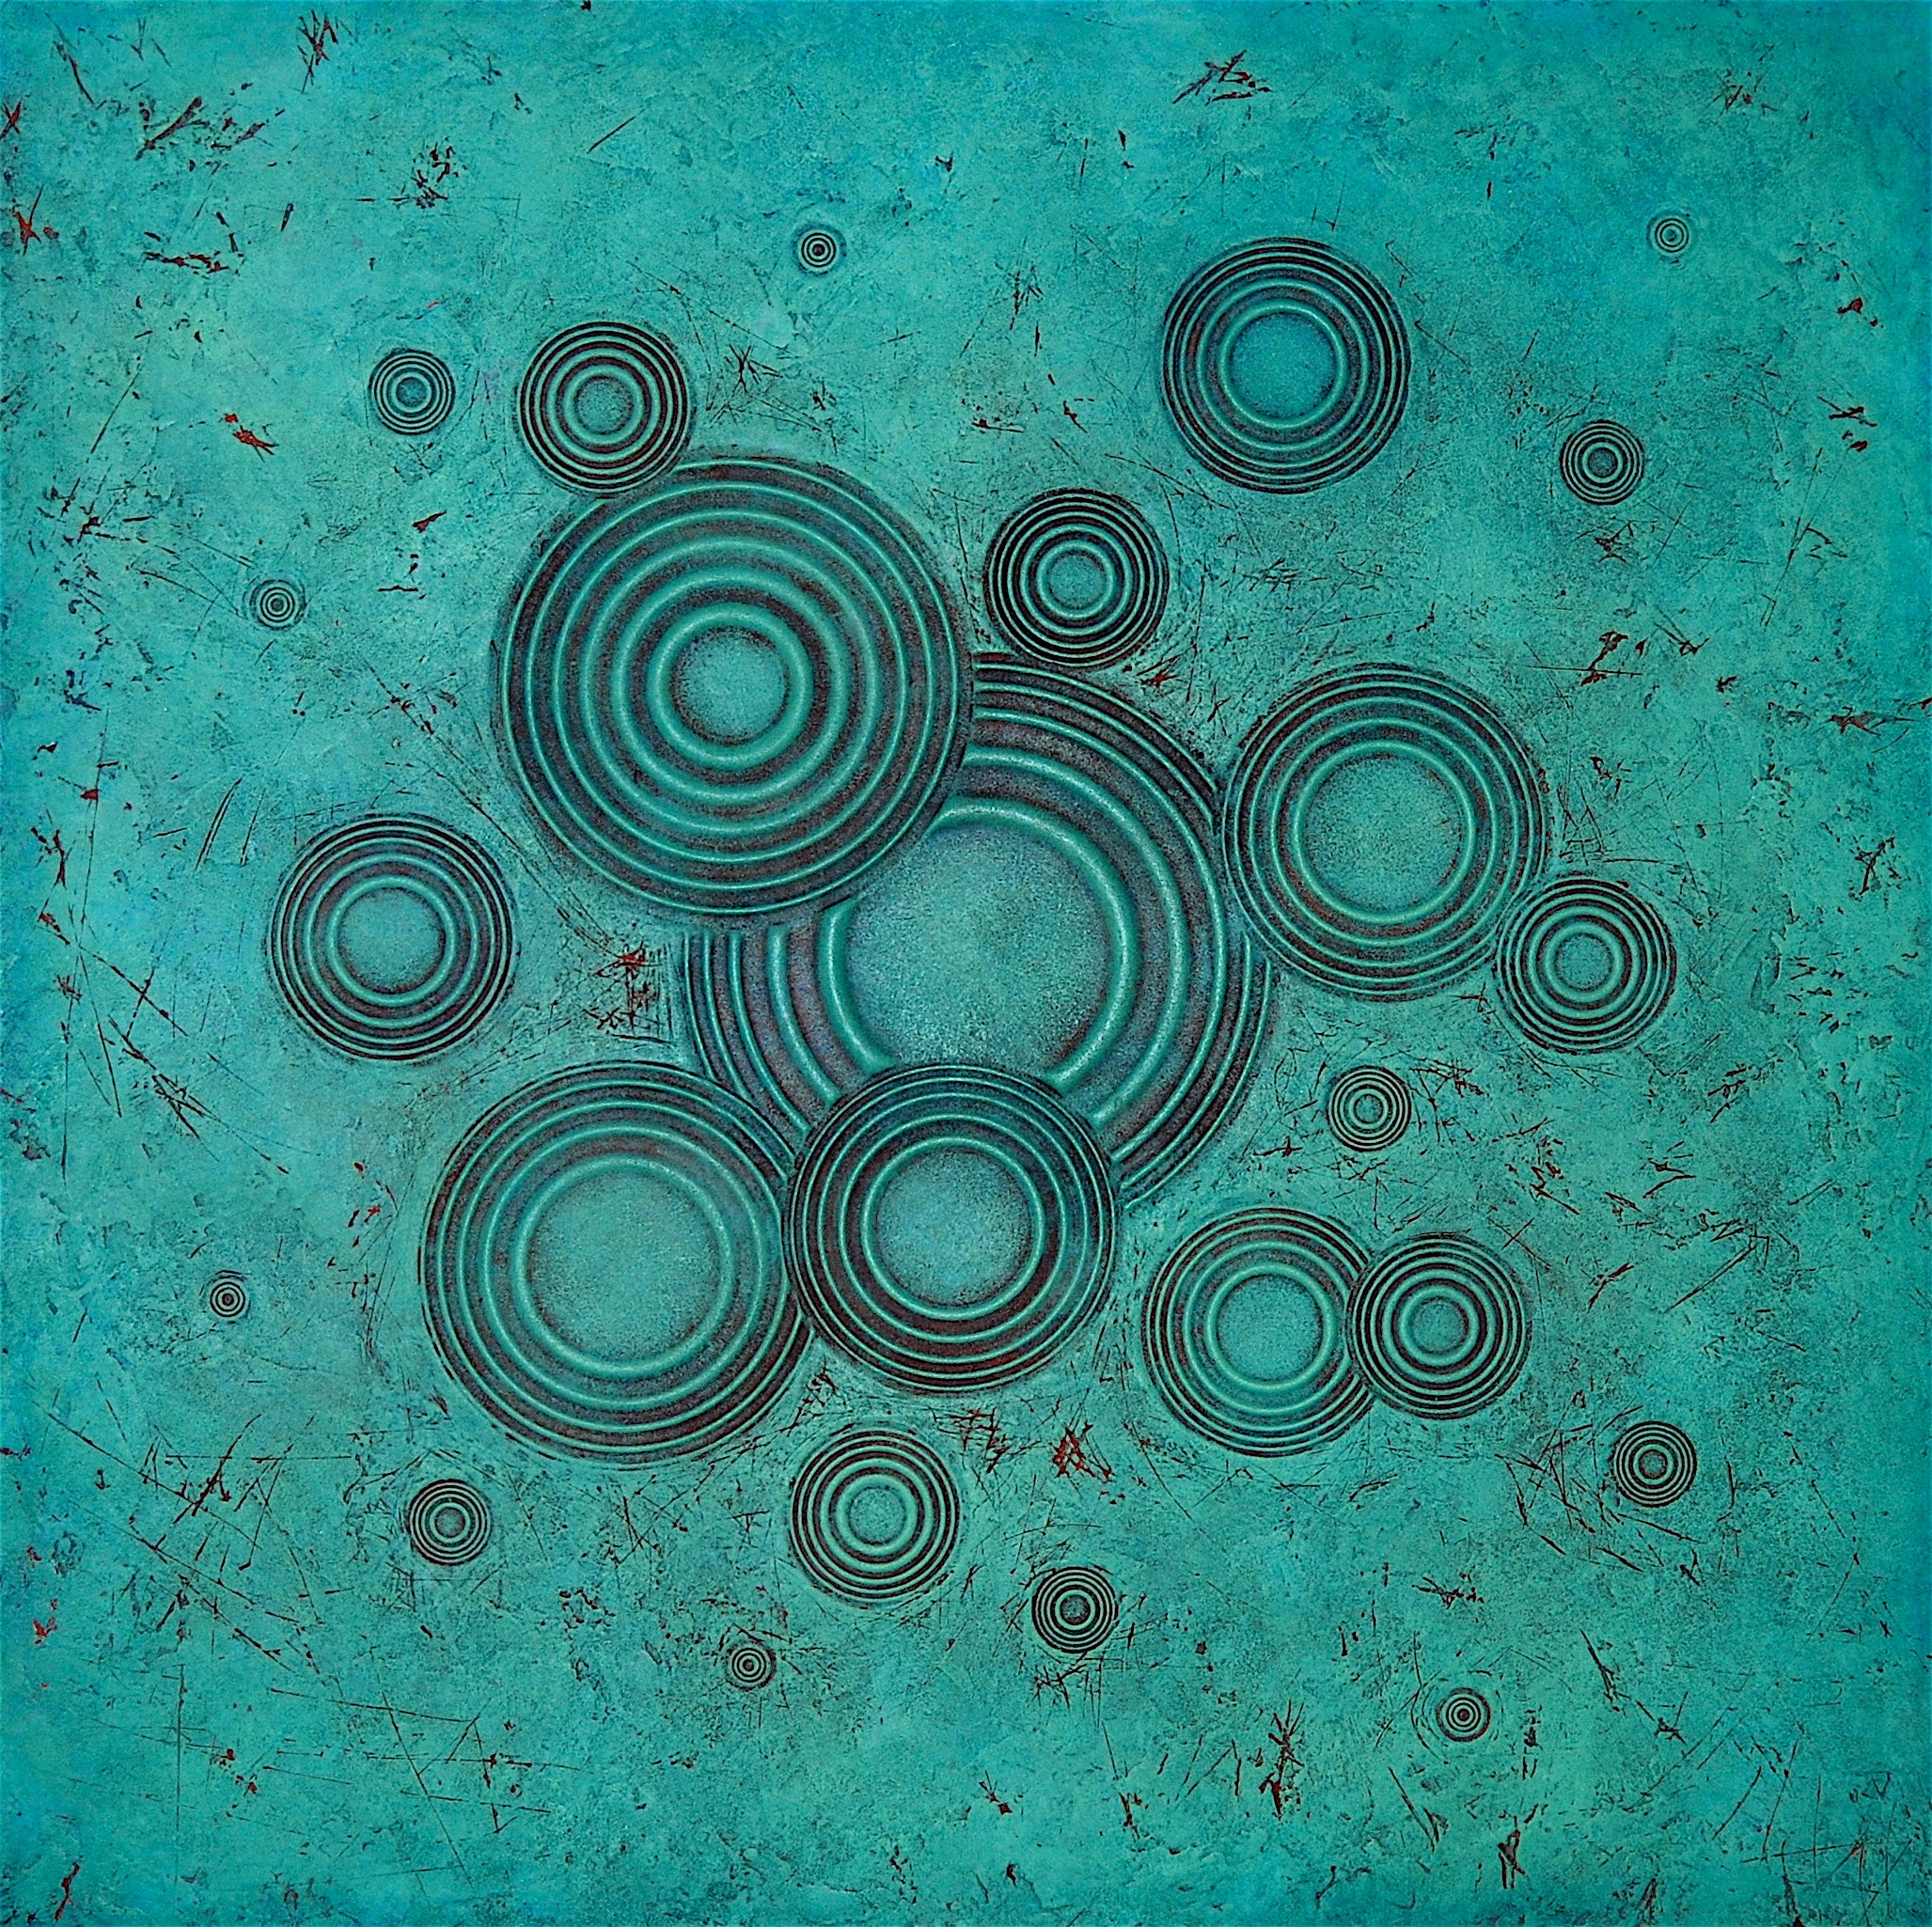 Thomas Coffin - Ripple Effect (turquoise), 36"h x 36"w x 2"d, mixed media sculptural wall relief